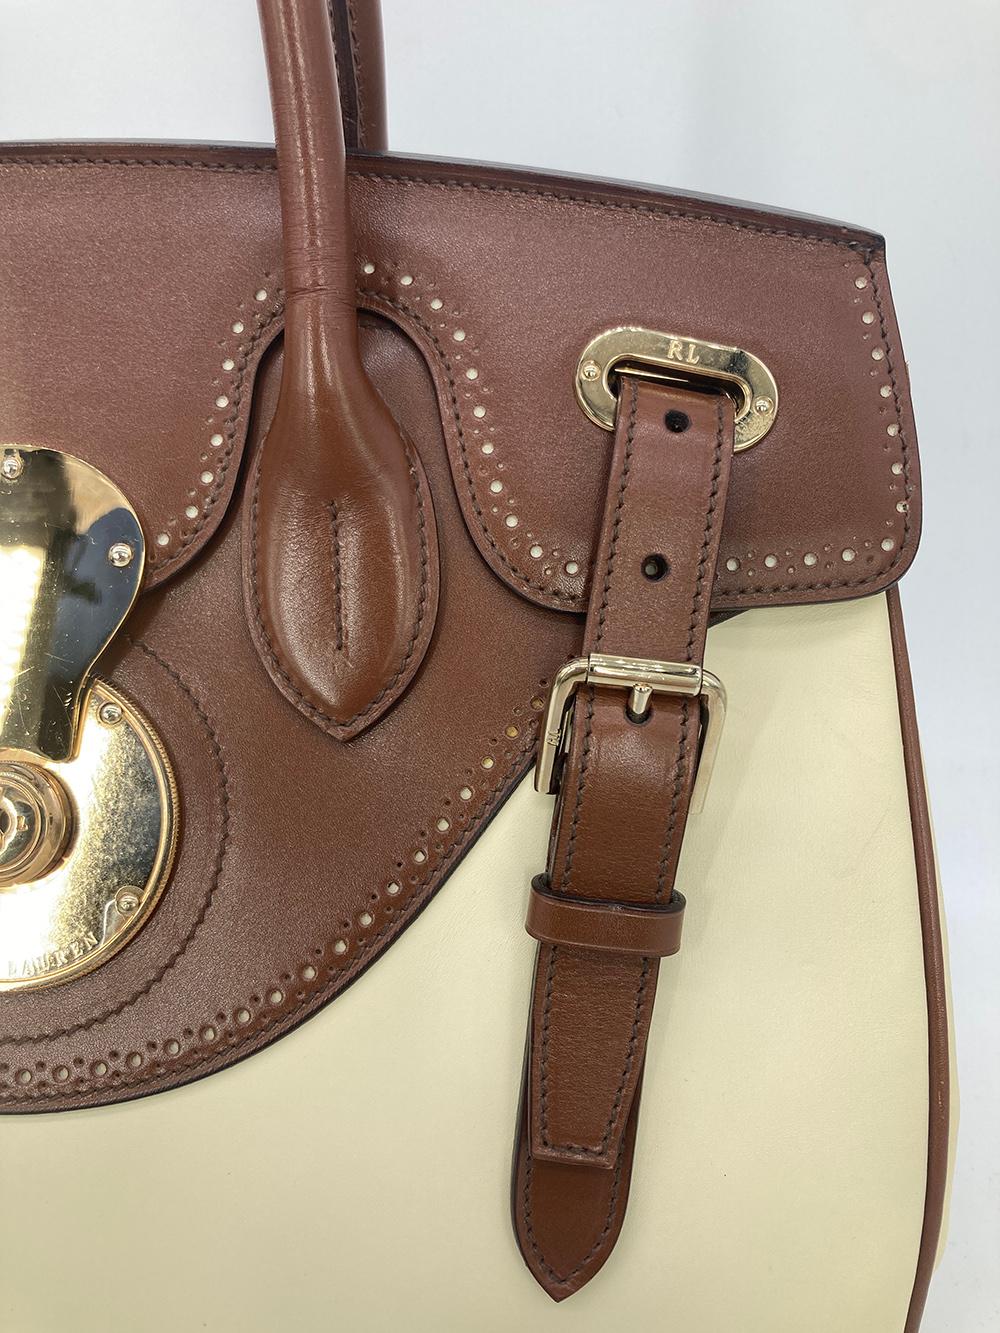 Ralph Lauren Cream and Brown Leather Rickey Bag For Sale 1